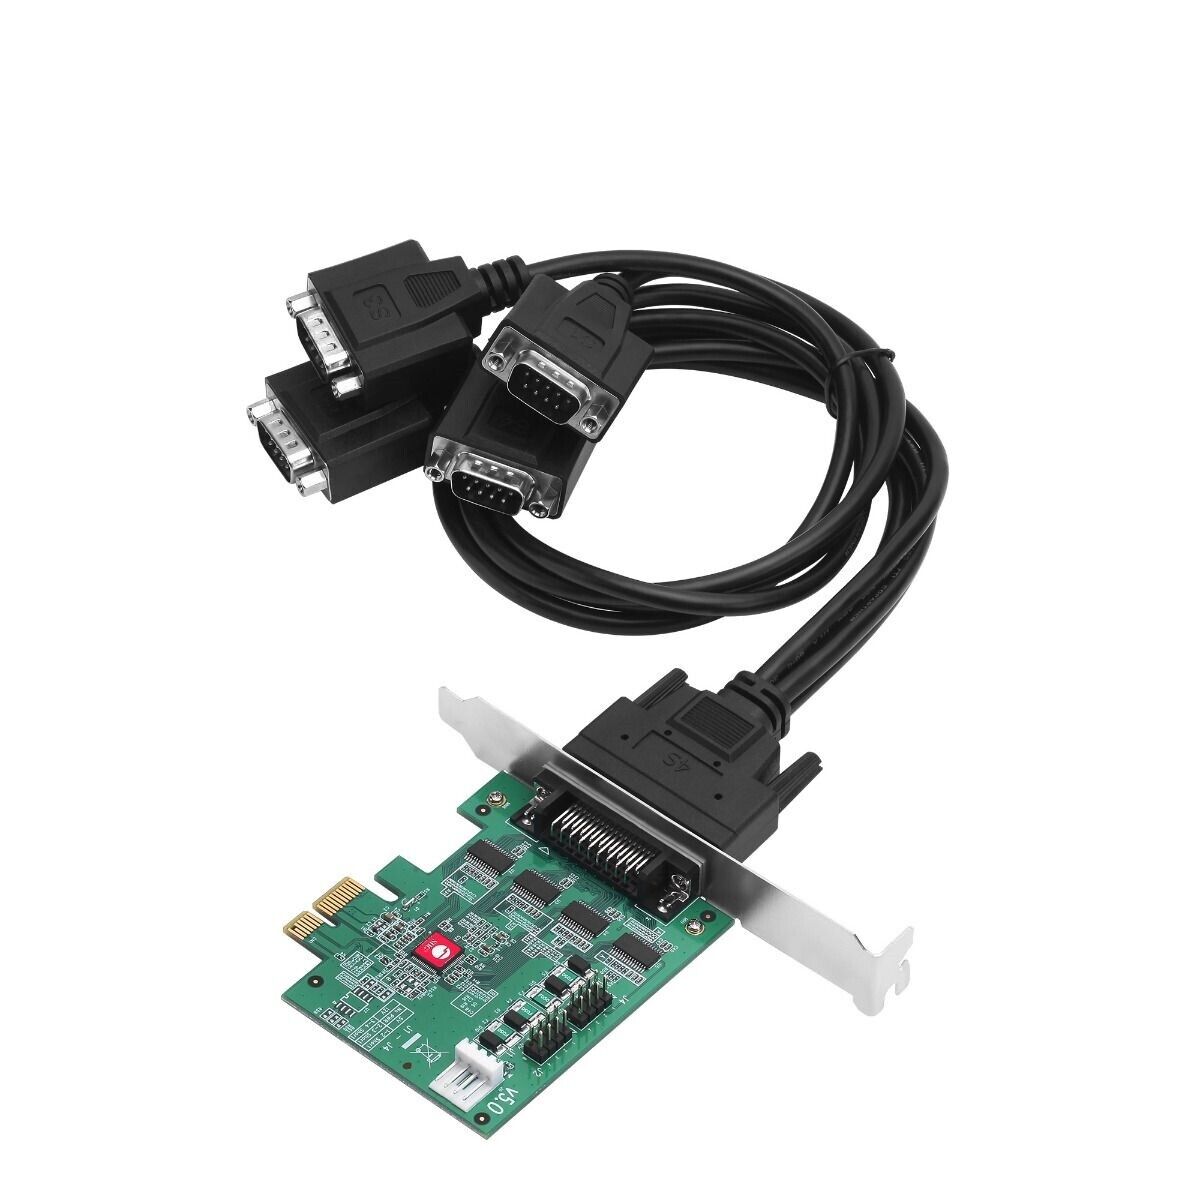 SIIG DP Cyber Serial 4S PCIe Adapter Card - Add 4X RS-232 (16550 UART)